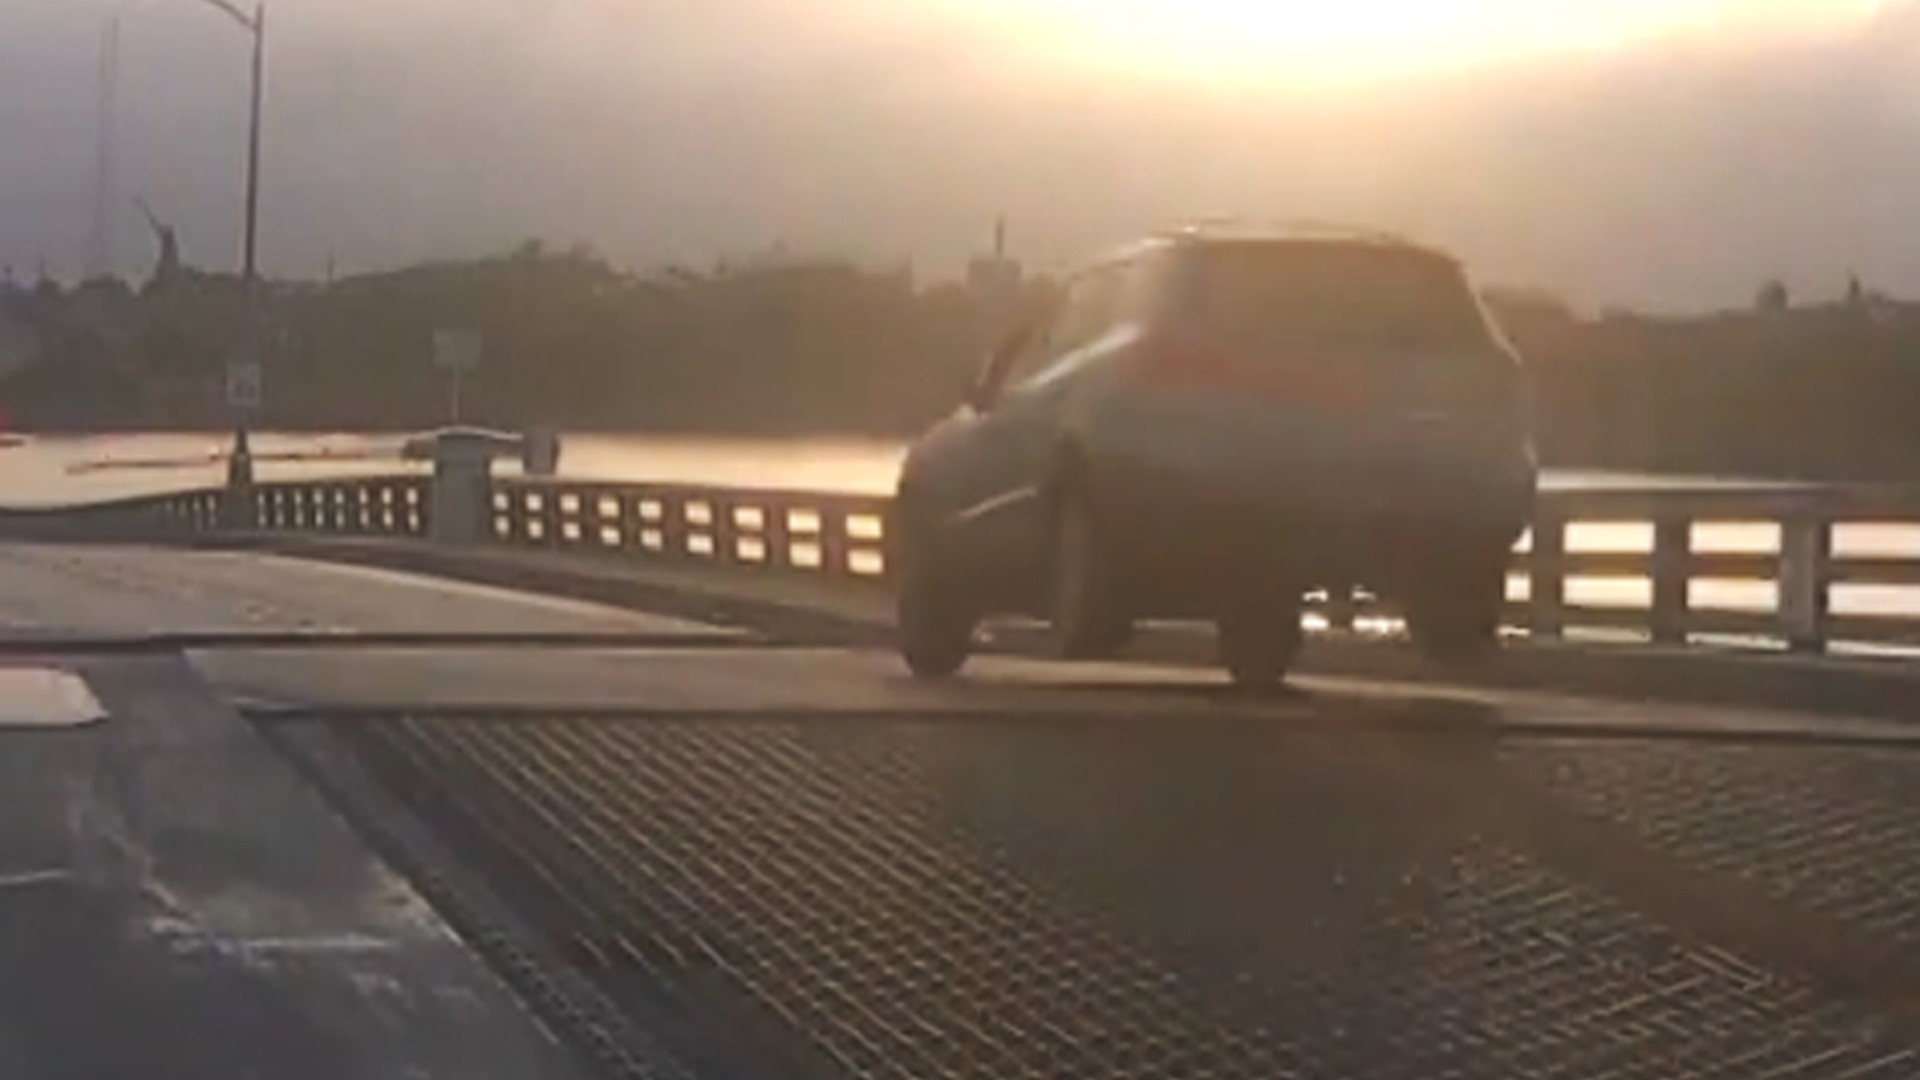 Cameras caught a driver crashing through a traffic arm and jumping a drawbridge that was going up in Daytona Beach, FL Monday (4/12).